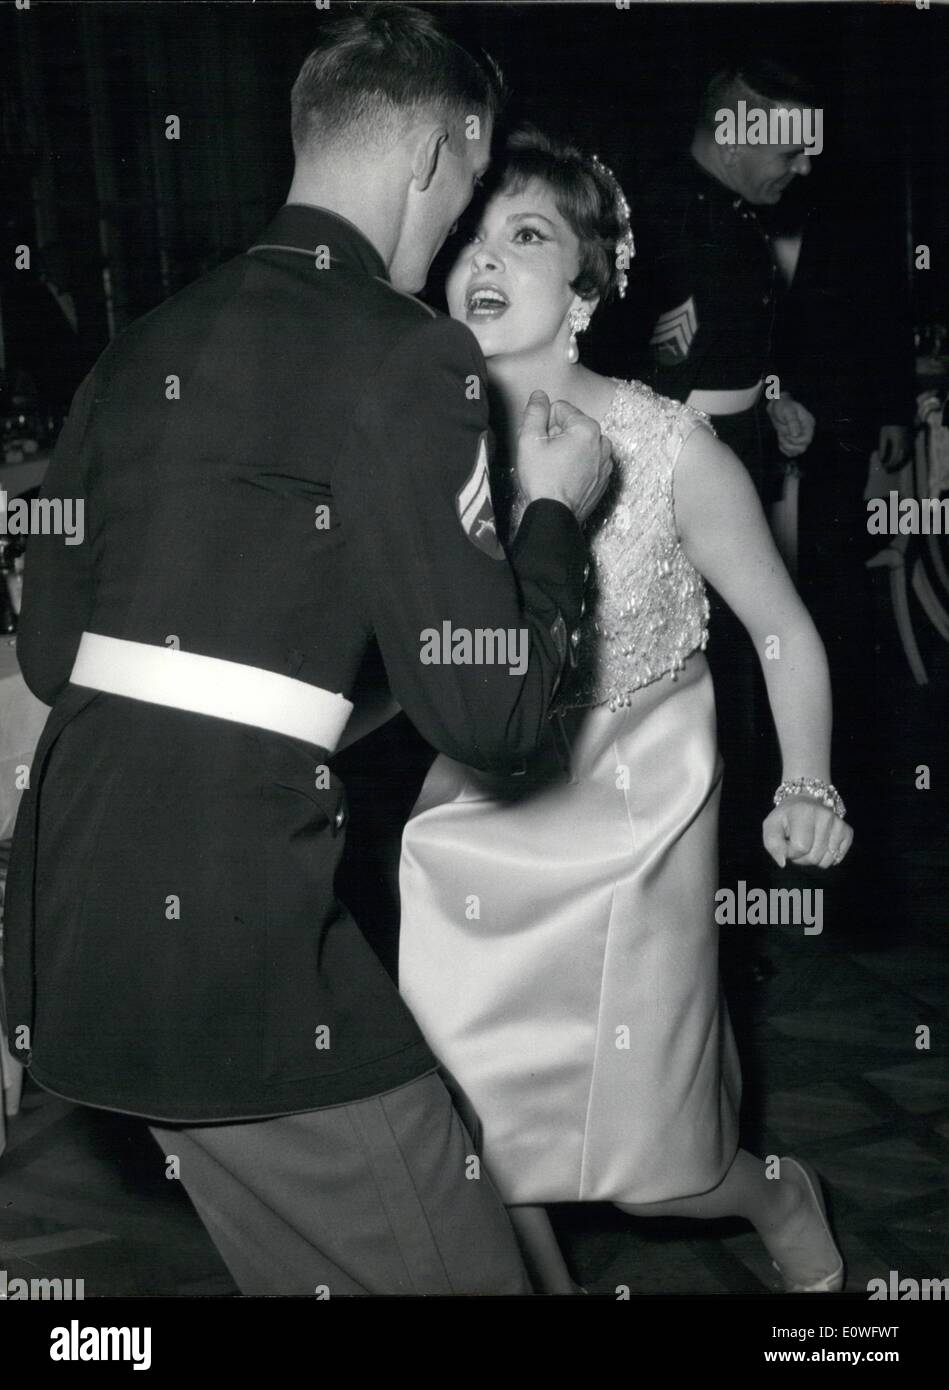 Nov. 11, 1962 - Italian actress has presented to the big ball at Excelsior Hotel, for the anniversary of foundation of the ''U.S. Marine Corps''. The actress has dancing with numerous Marines of Rome. Stock Photo